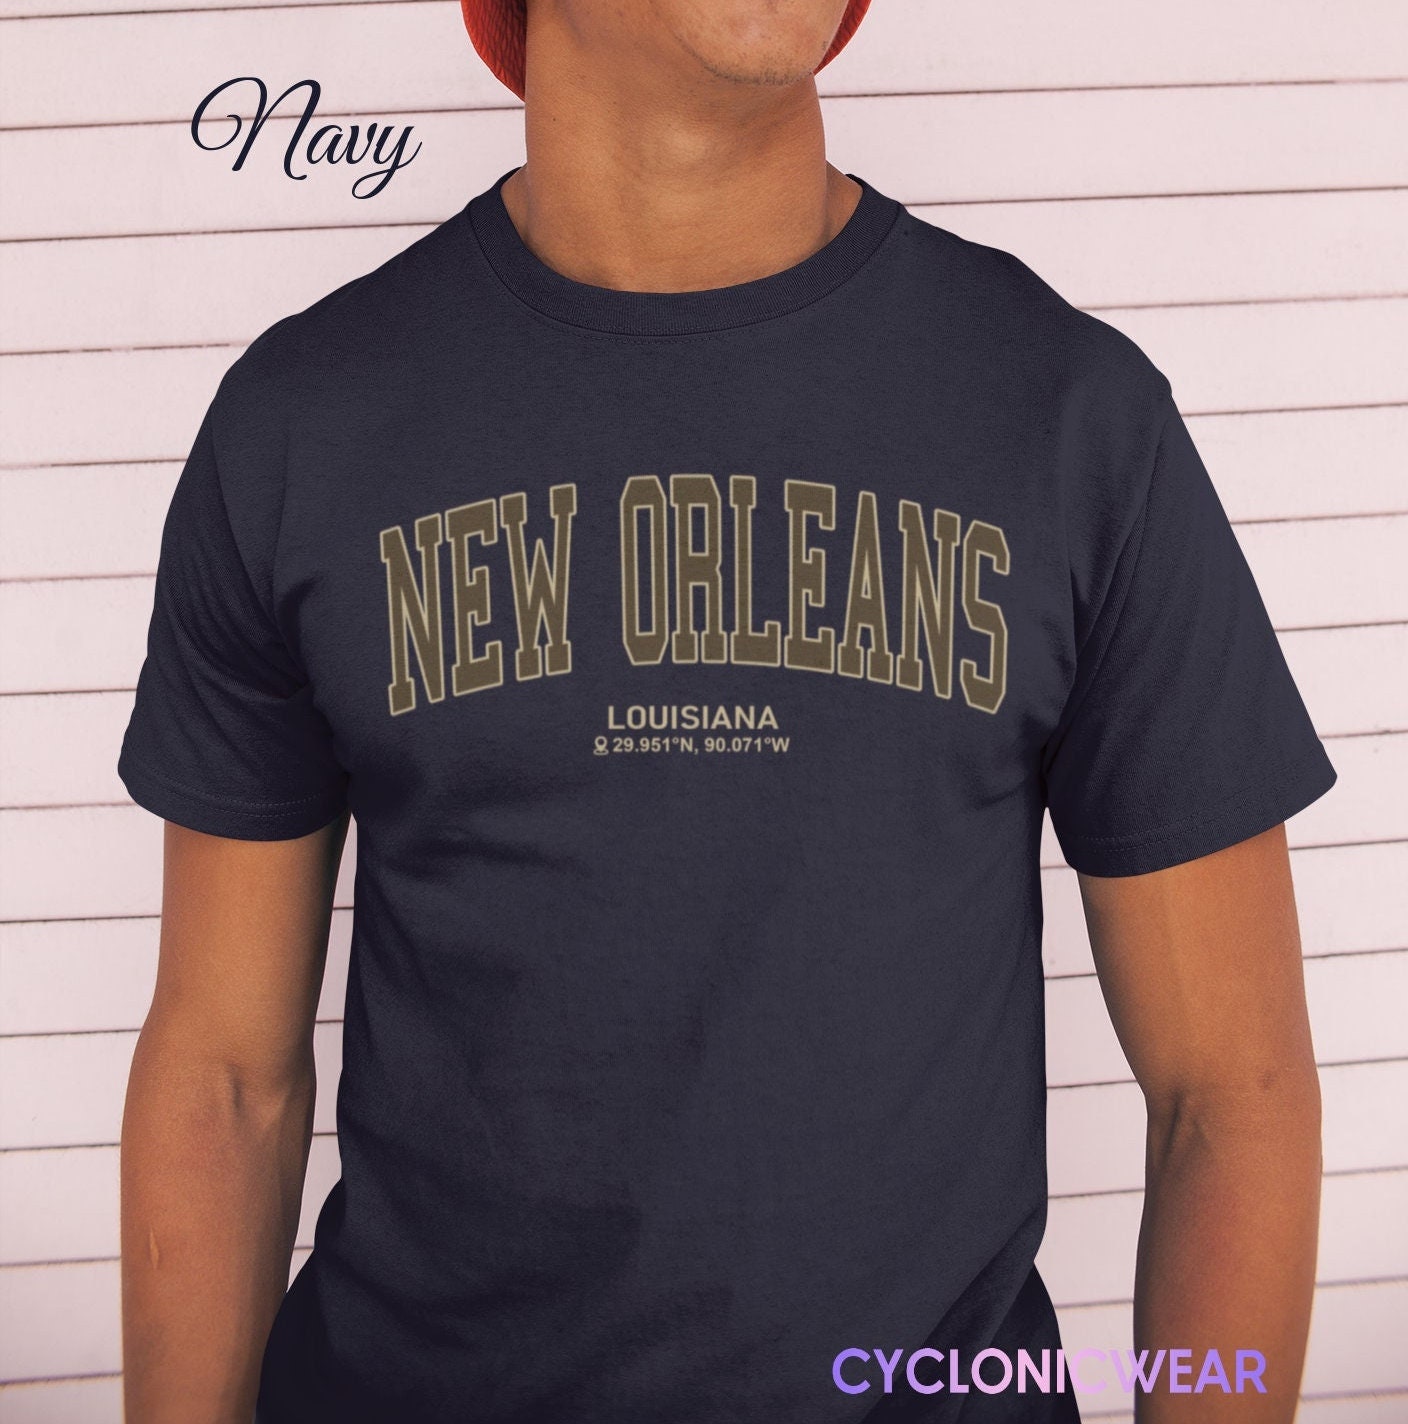 New Orleans Louisiana Shirt Vintage Style New Orleans image